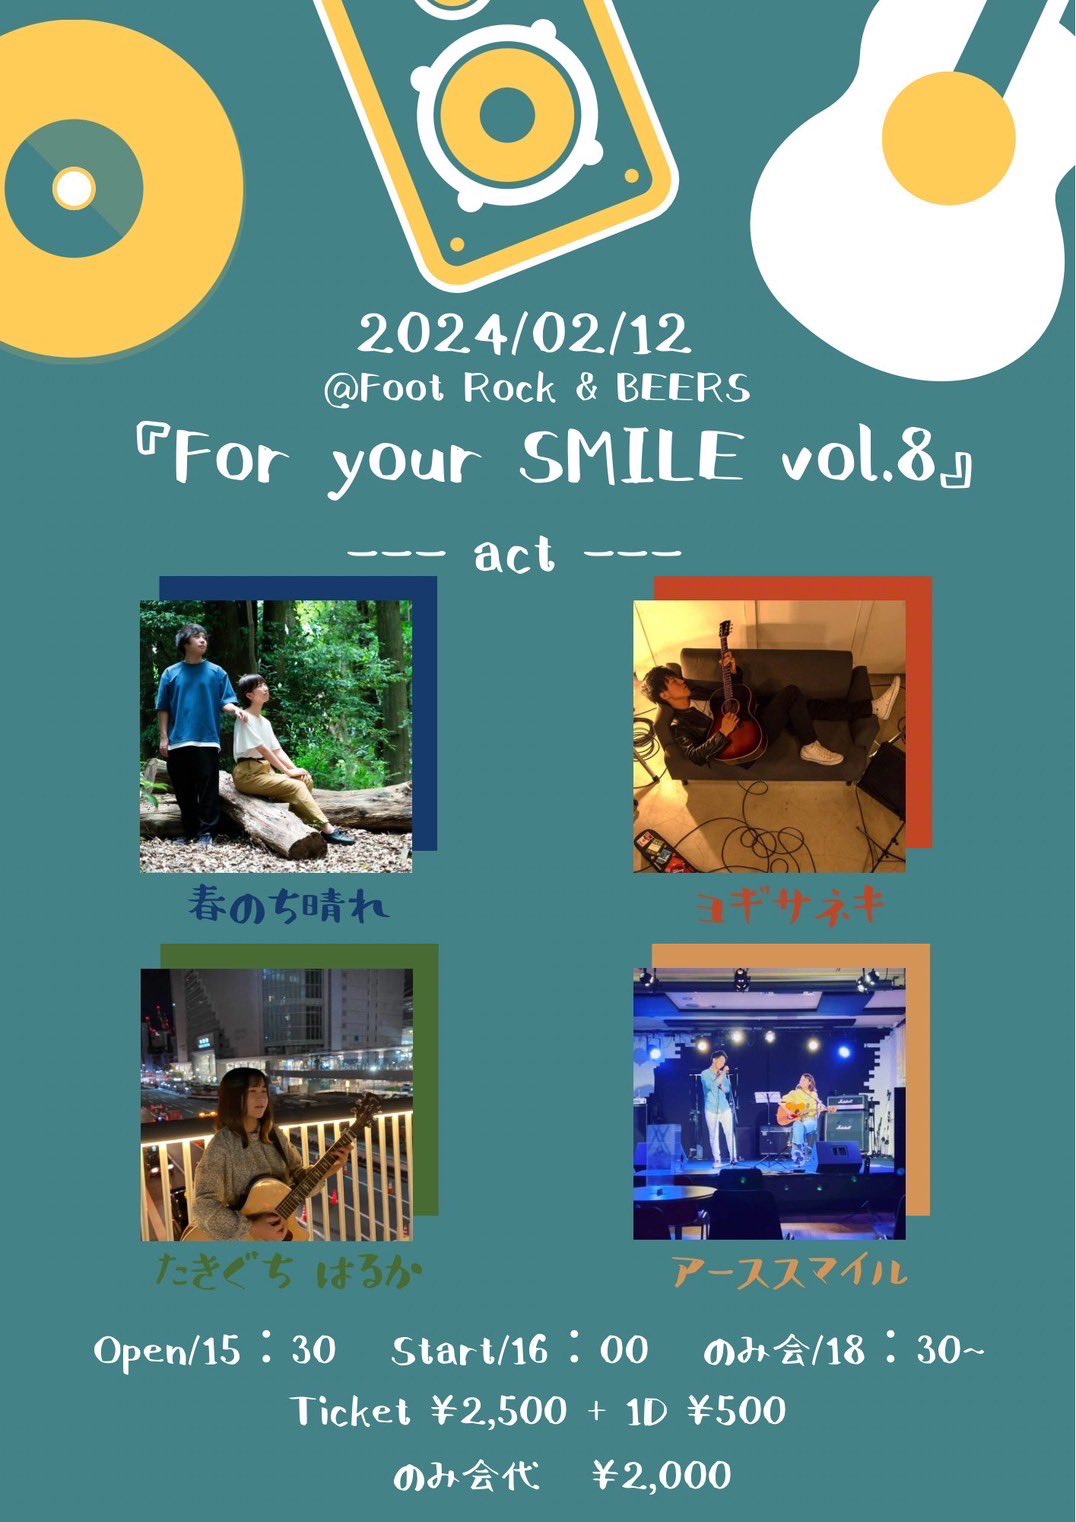 For your SMILE vol.8